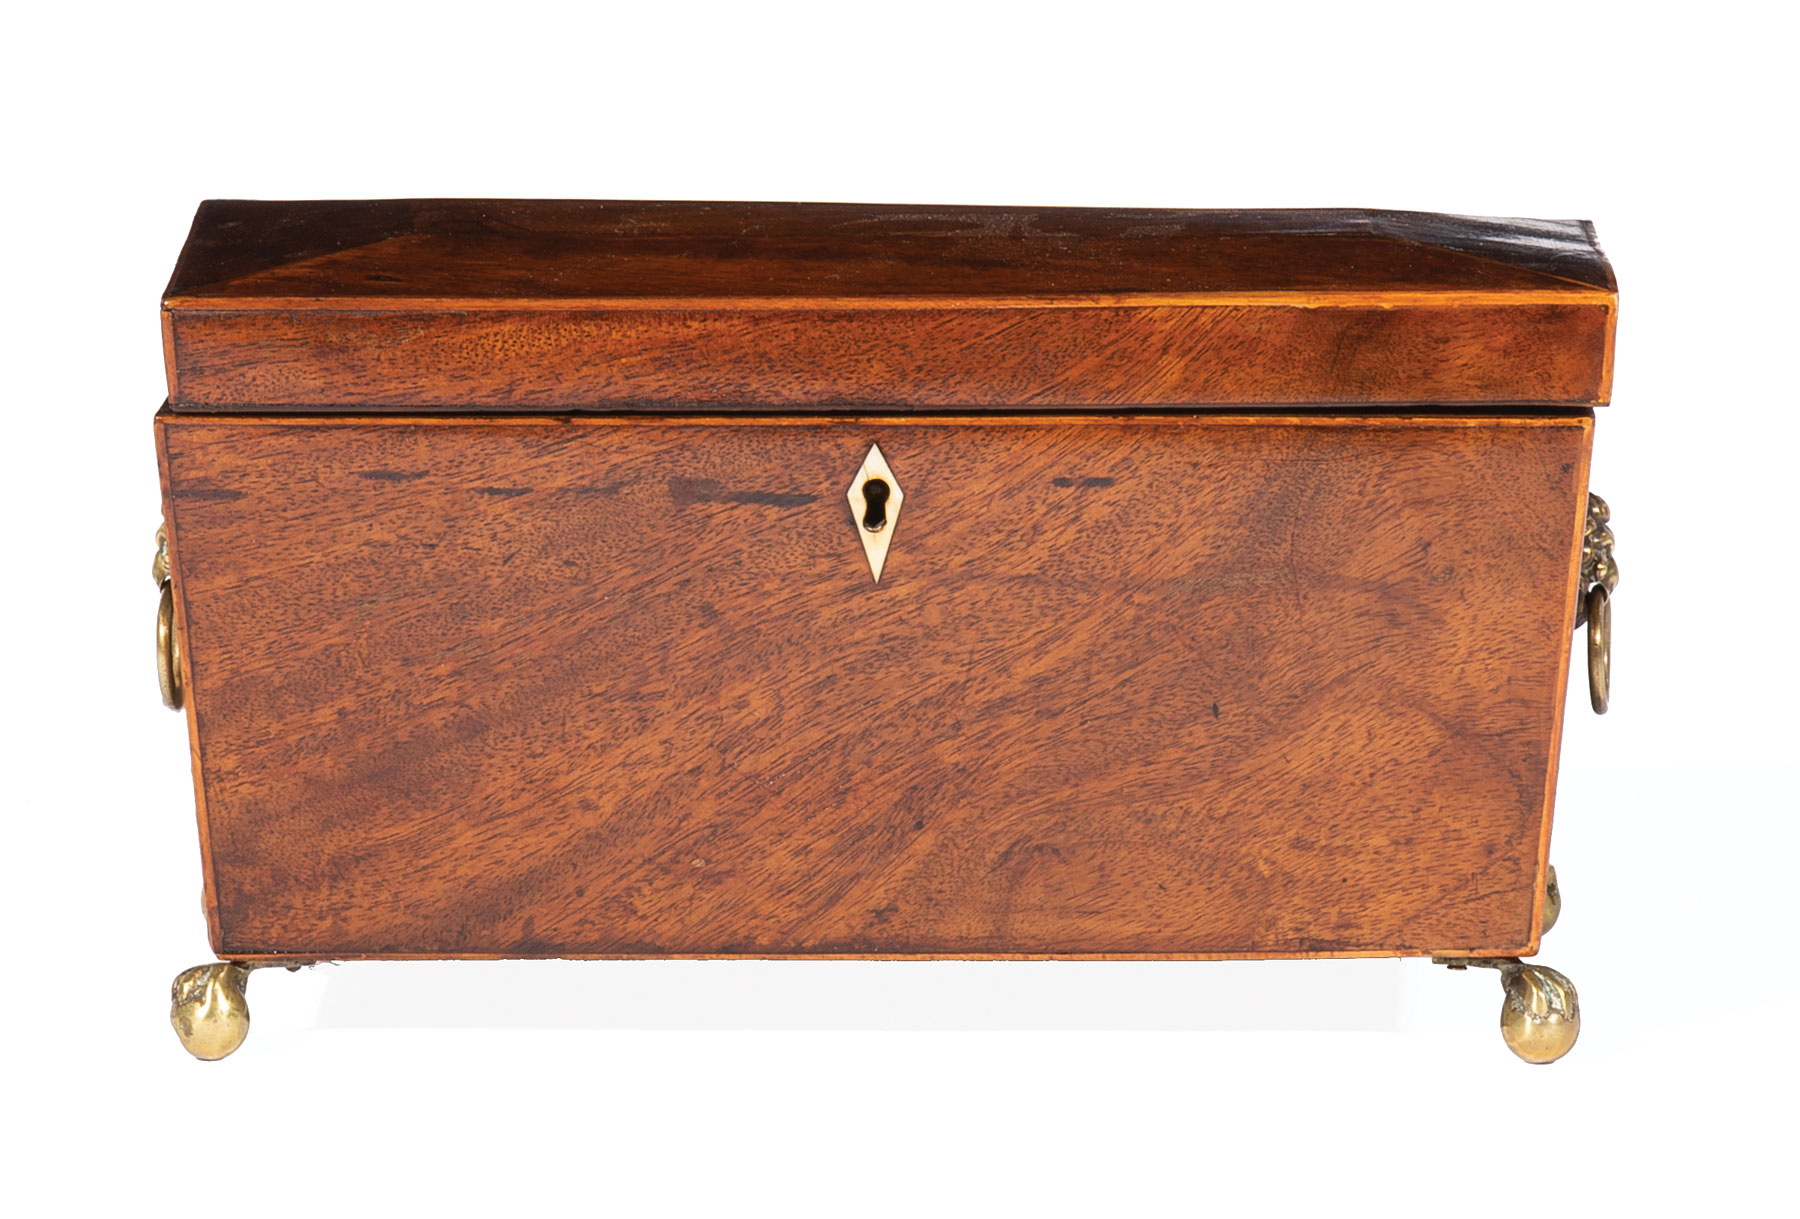 George III Mahogany Tea Caddy , c. 1790, rectangular form, interior with two lidded compartments, - Image 2 of 2